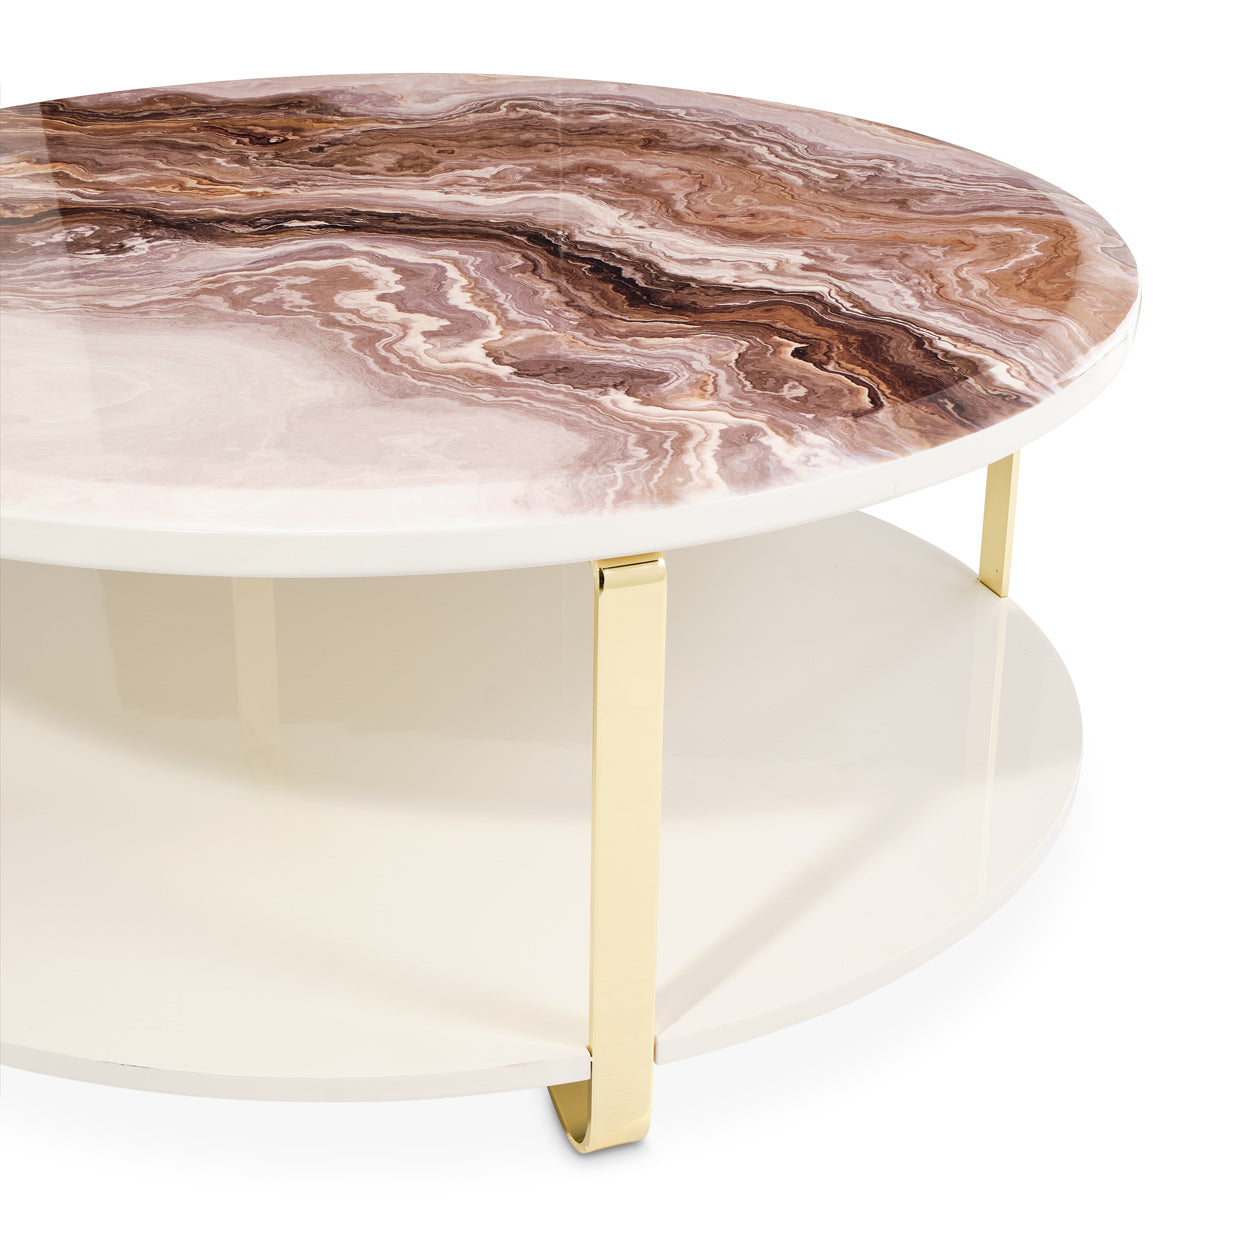 Ariana Cocktail Table, Living room transformation, Faux marble top, Golden legs, Sheer, elegance, Functional lower shelf, Storage, Glamorous centerpiece, Impressing guests, Ready to impress, Select items, dream art, michael amini